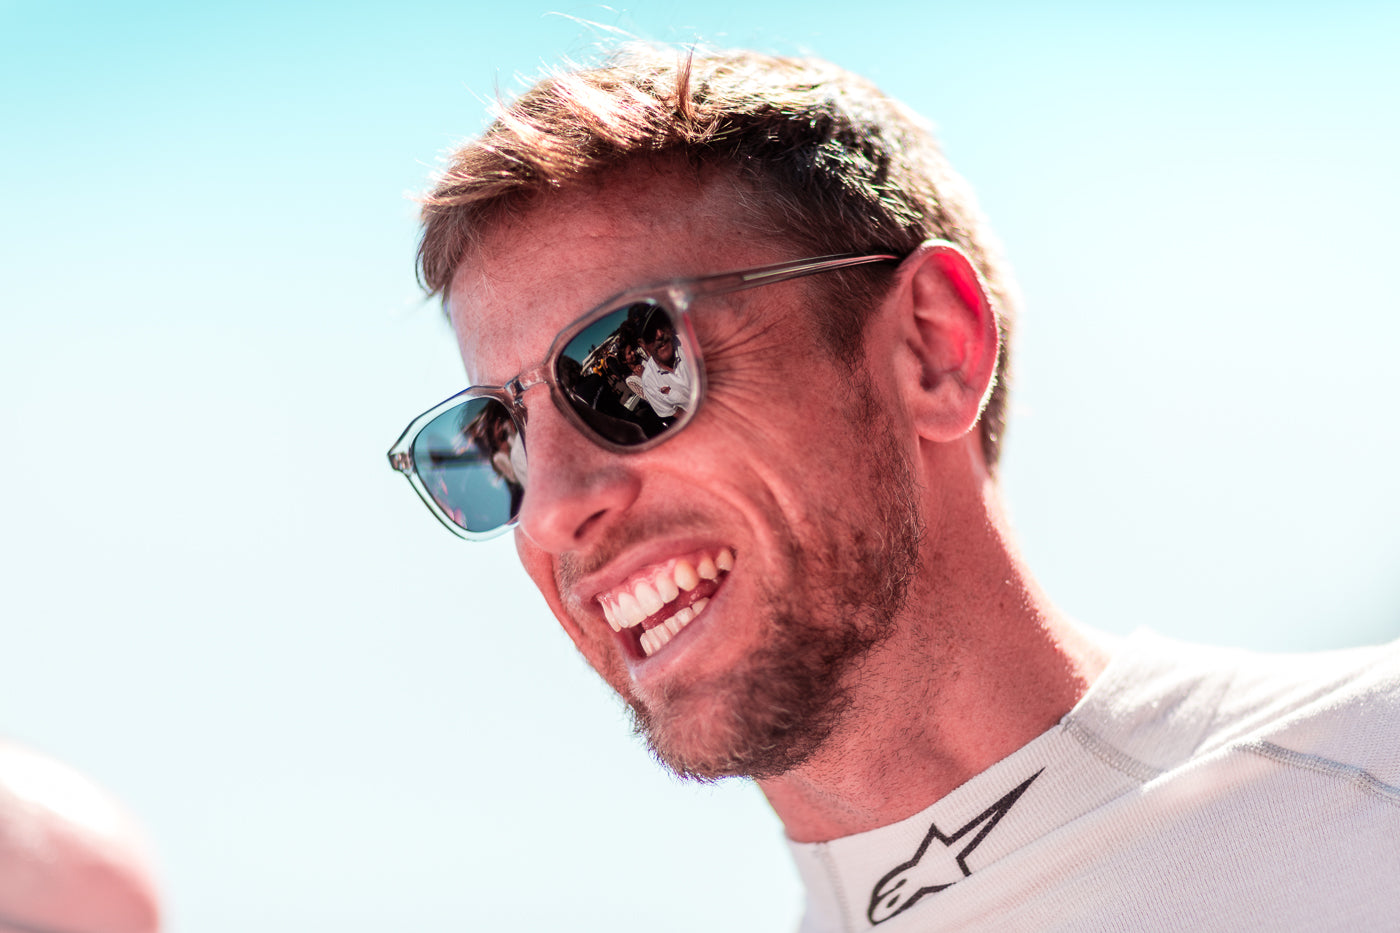 Former Formula 1 driver Jenson Button posing with sunglasses at the Goodwood Festival of Speed. (Photo: Alex Lawrence – The White Wall 2018)